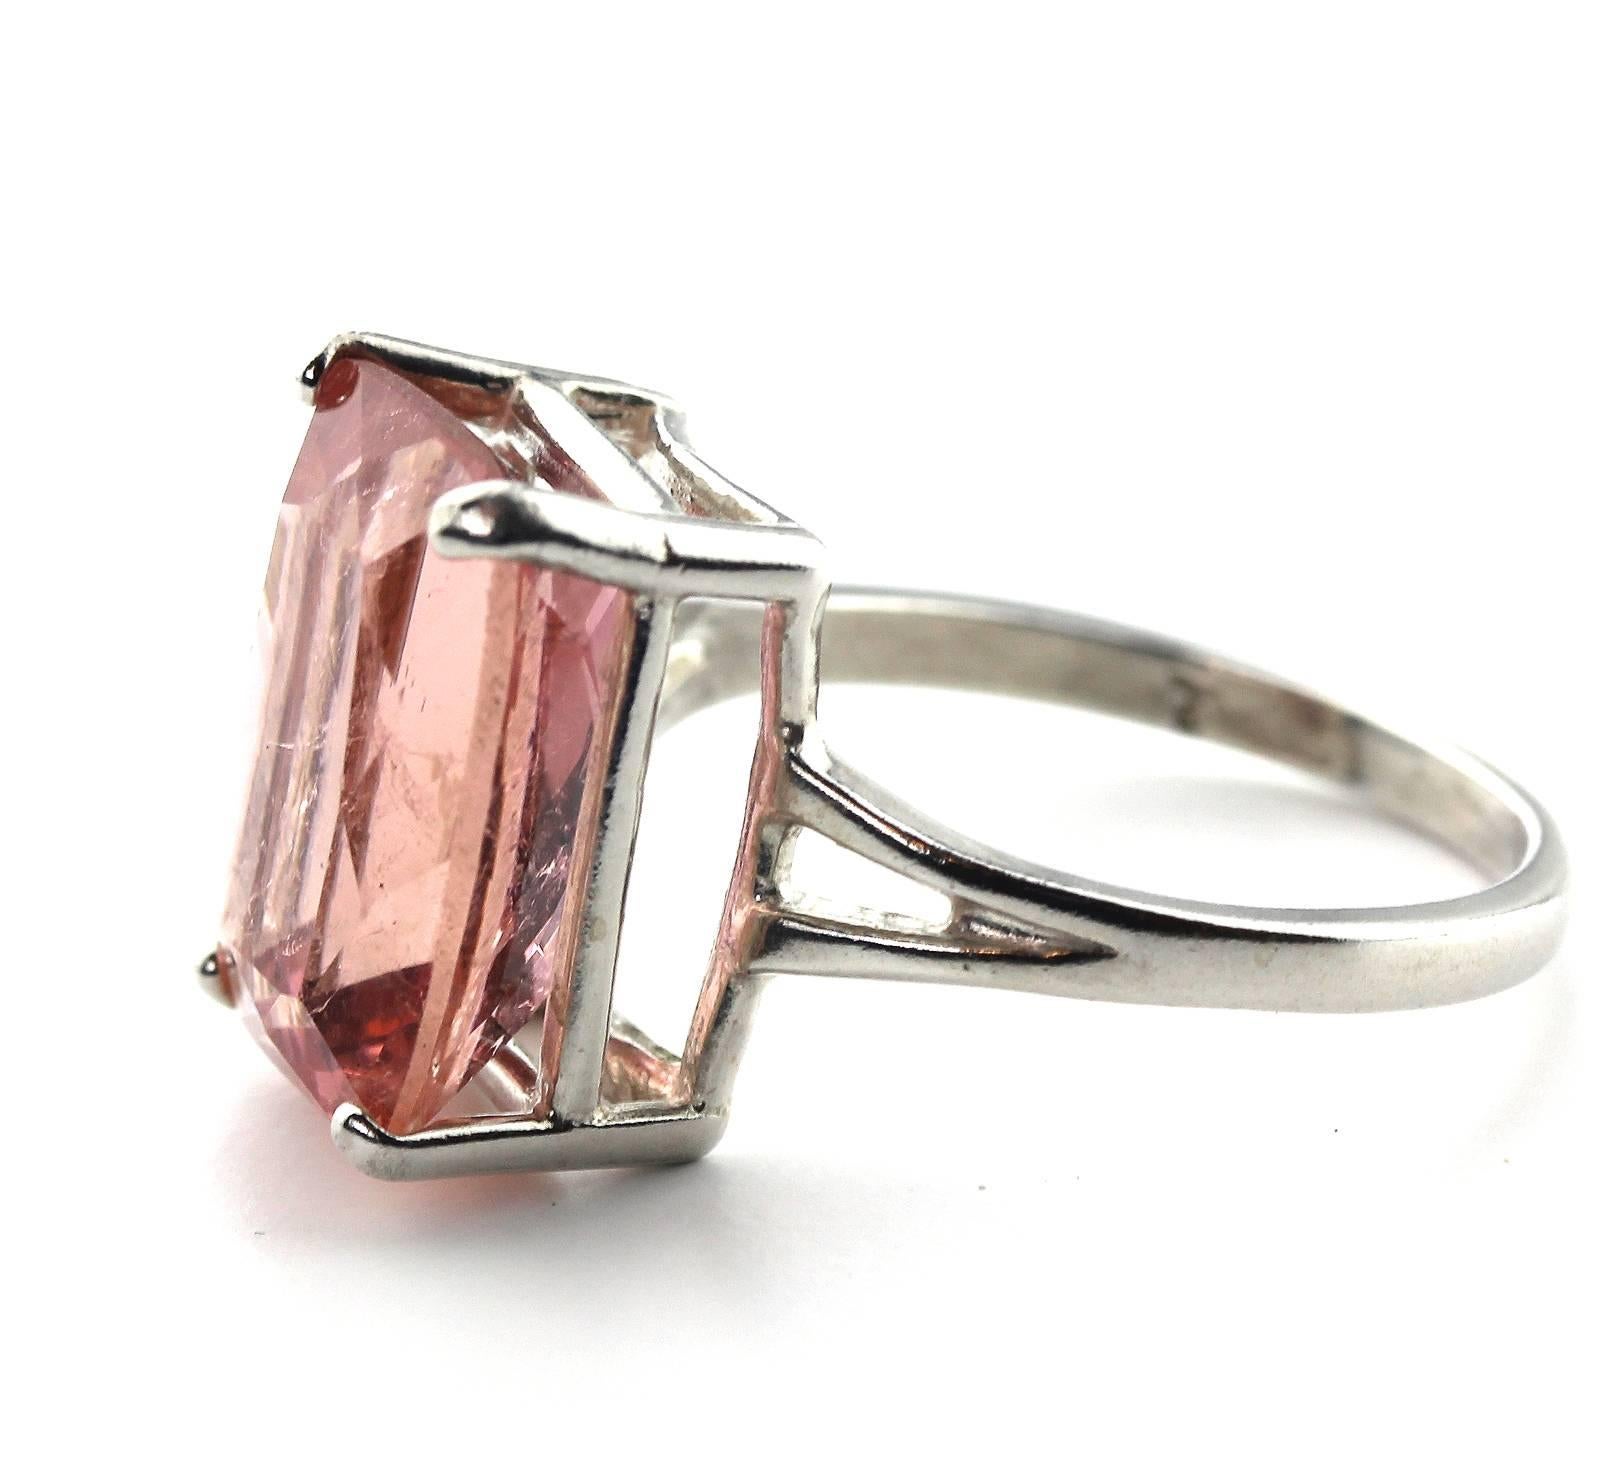 This beautiful 8.12 Carat pink emerald cut Tourmaline sparkles magically and is sent in a unique handmade Sterling Silver ring size 7 (sizable).  The gemstone has no visible inclusions and comes from the famous Minas Gerais Mine in Brasil.  More